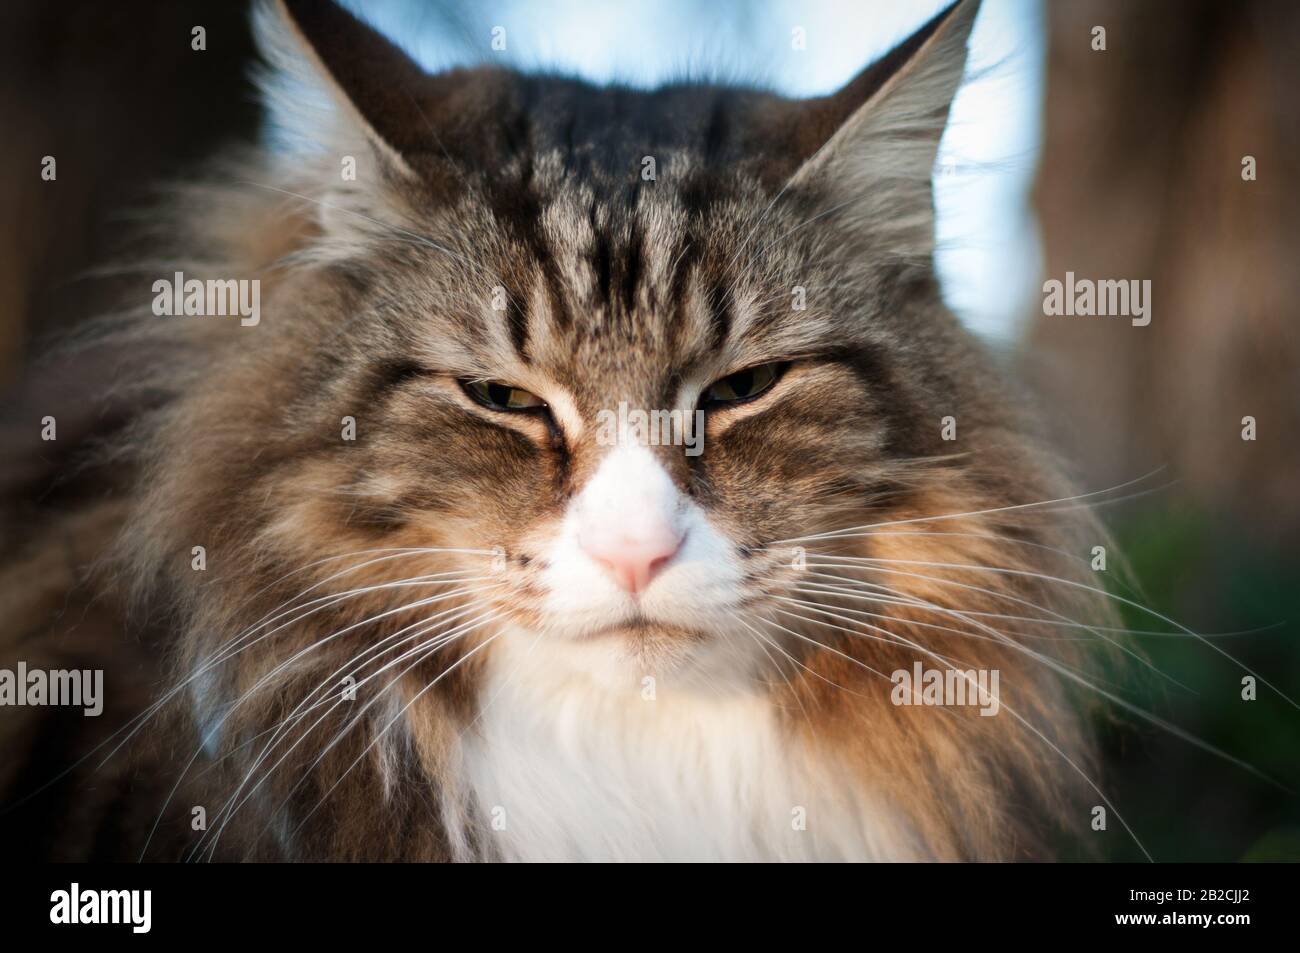 close-up of a cat's face outdoor. norwegian forest cat portrait Stock Photo